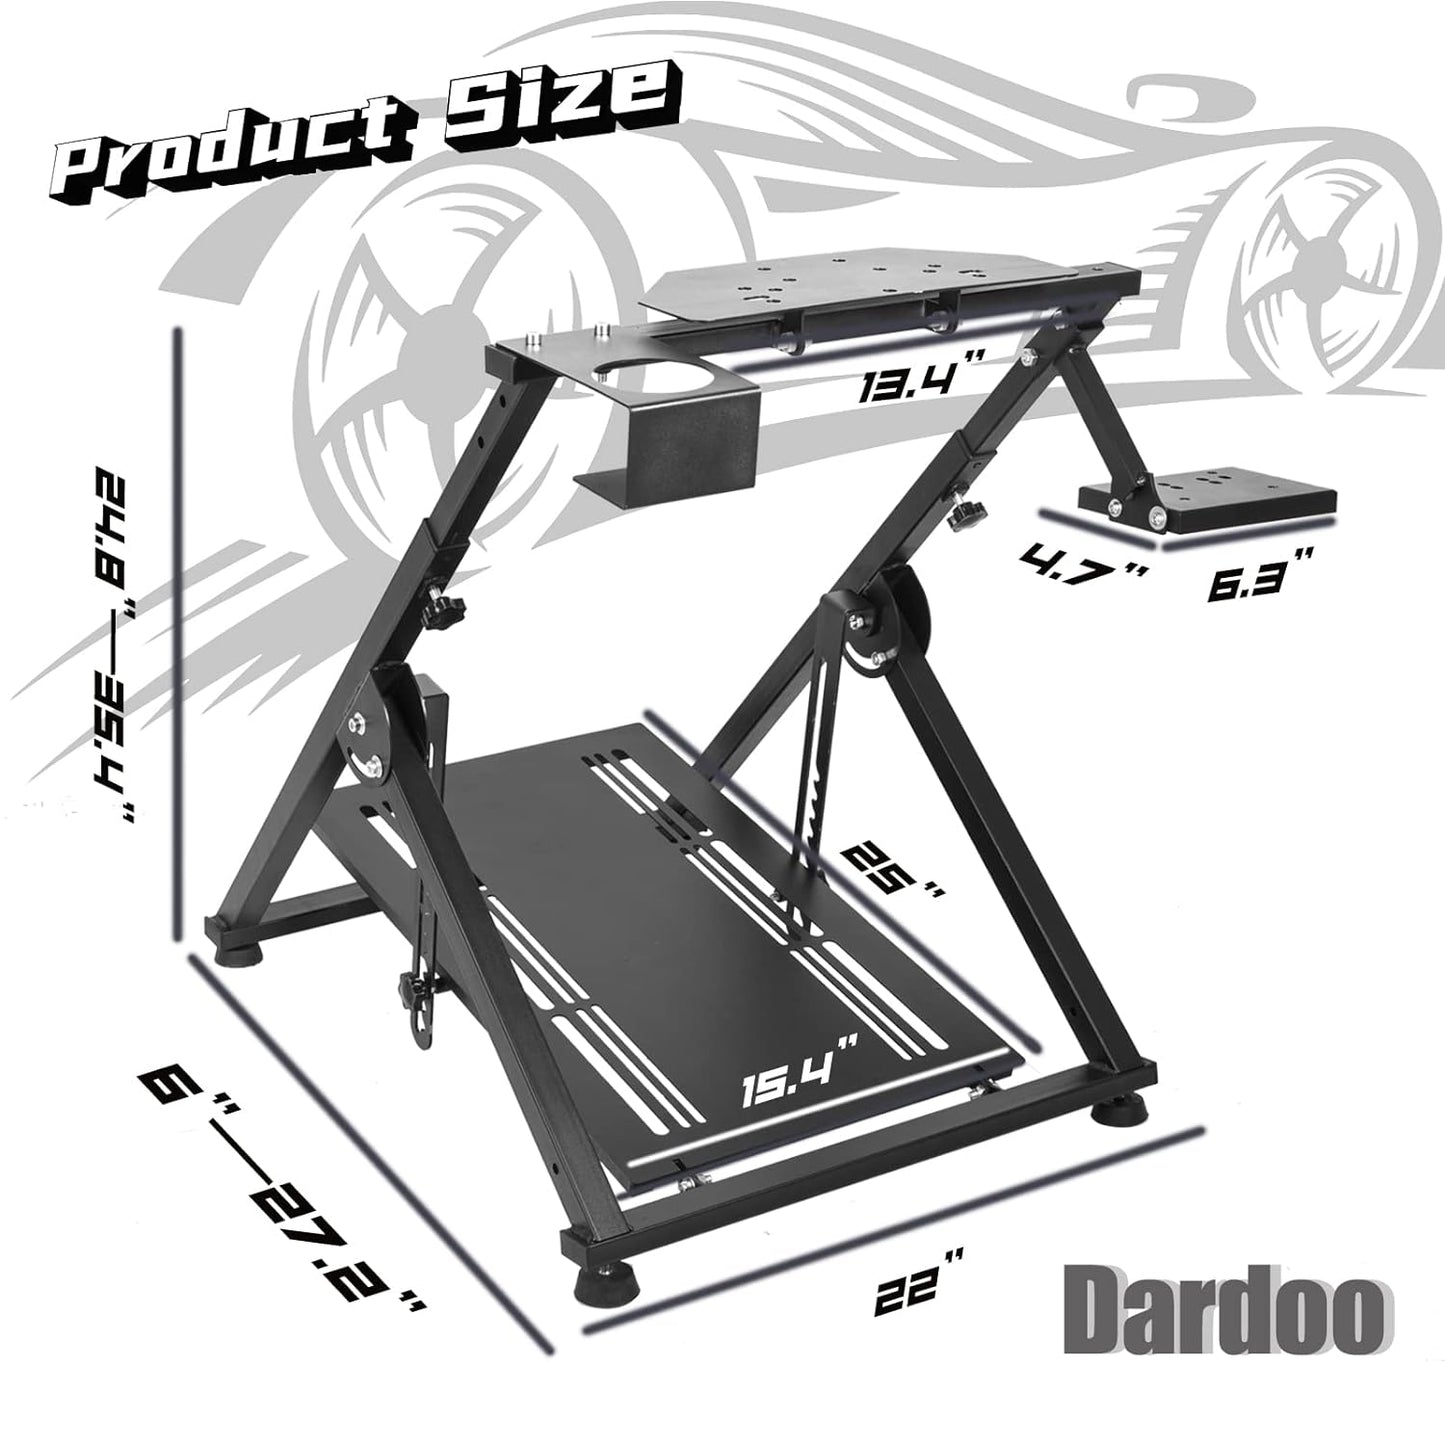 Dardoo Adjustable X Frame Racing Wheel Stand Frame Fit for Logitech G27 G25 G29 G920 T300RS T150,Foldable Racing Simulator Steering Wheel Stand Without Wheel, Shifter and Pedals